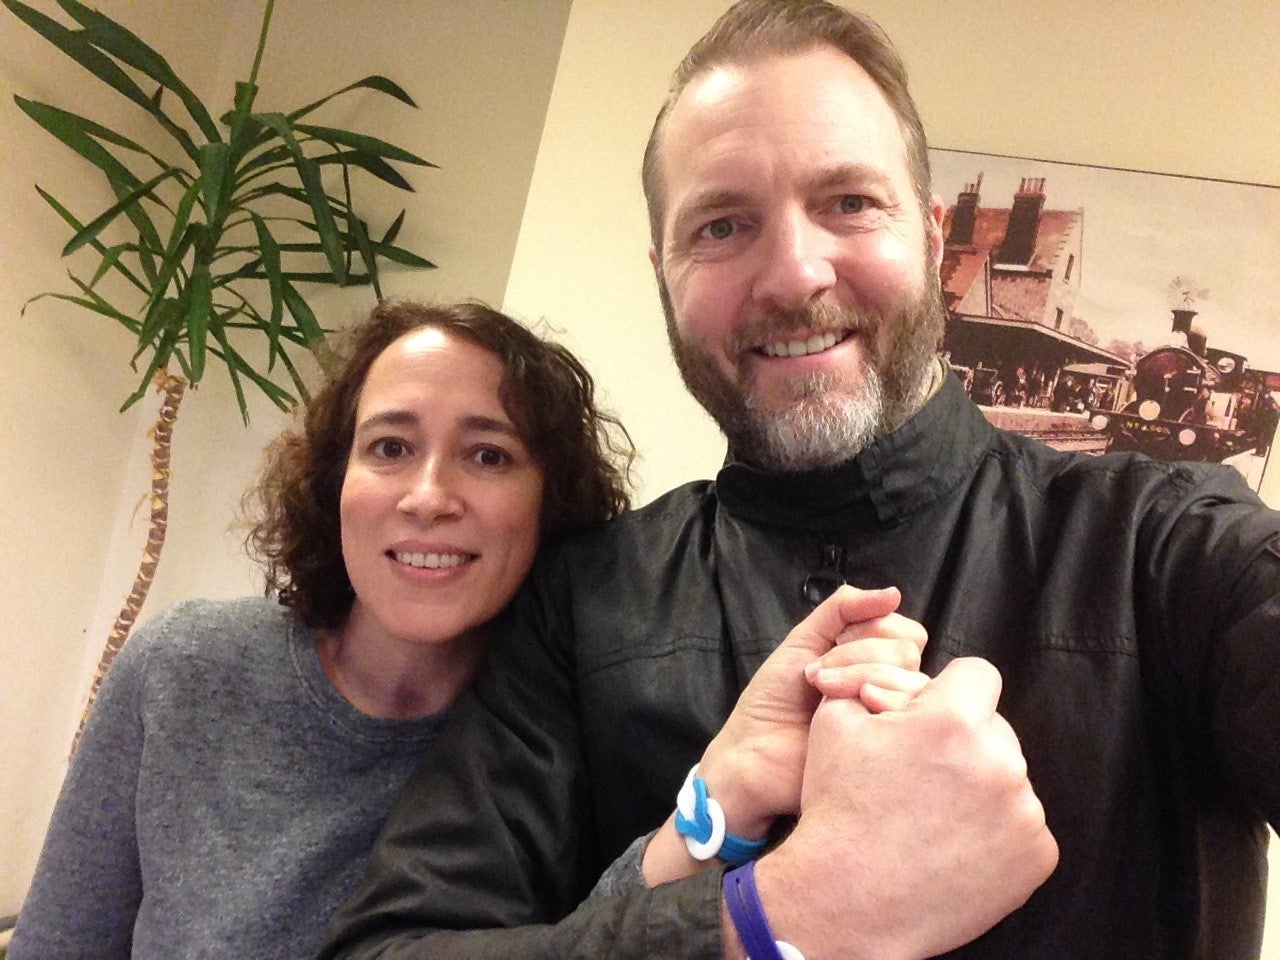 Yasmin, who was diagnosed with breast cancer, and her husband, Jason, support the Unity Band campaign